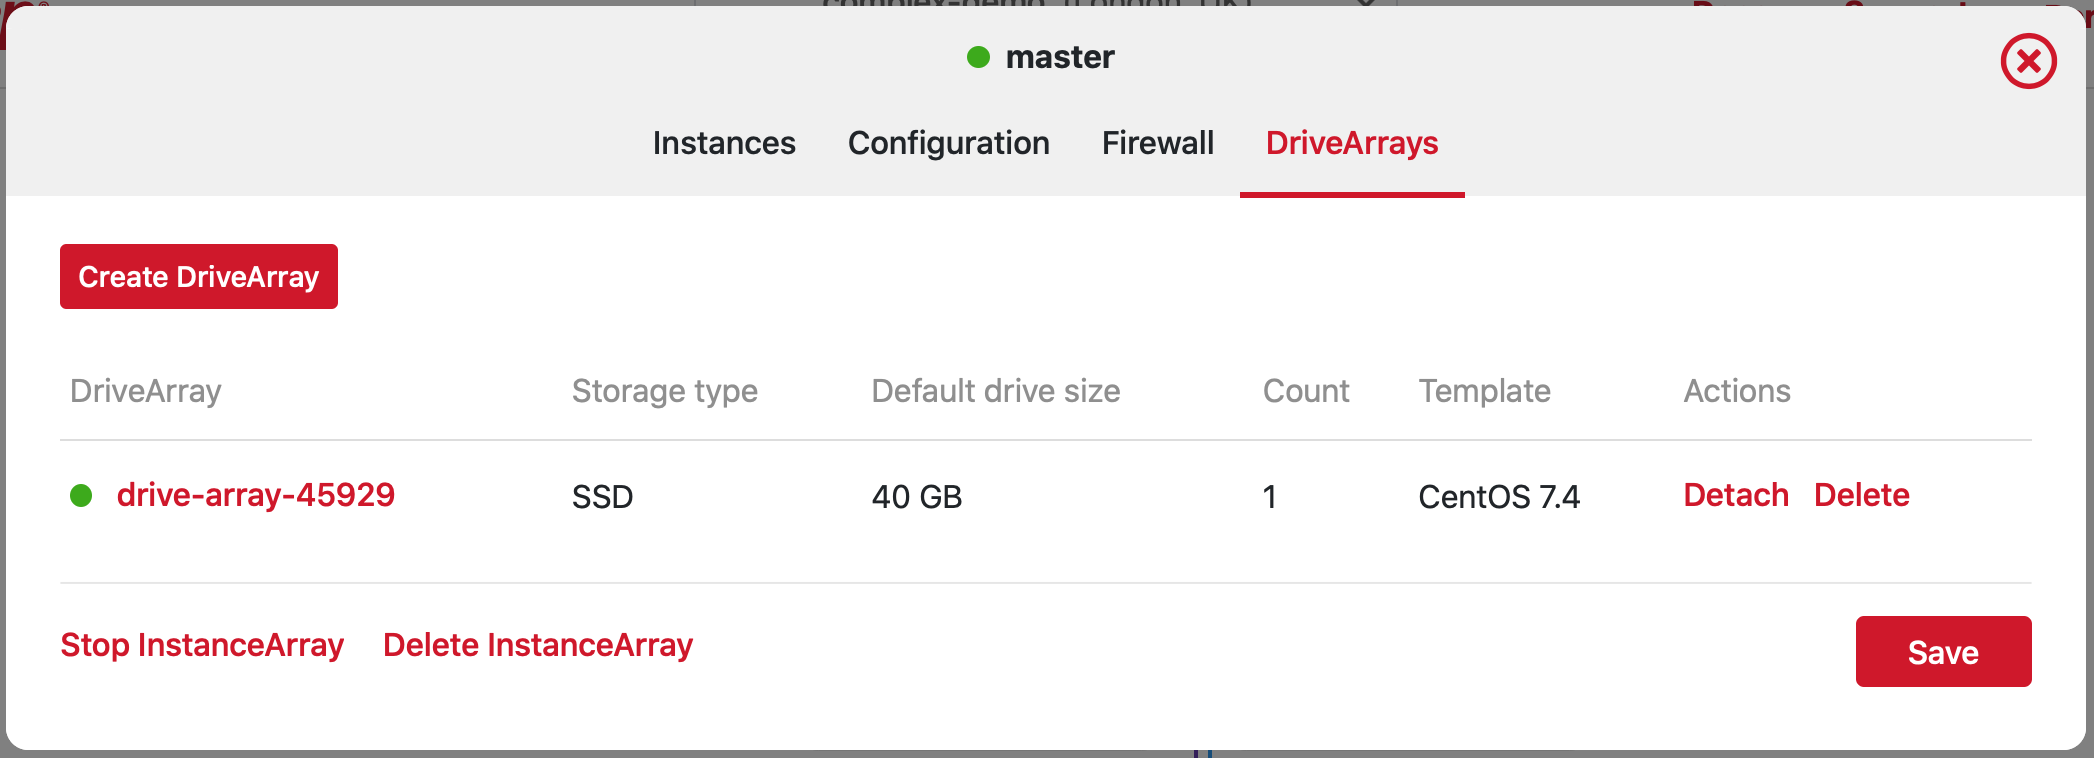 ../../_images/managing_drive_arrays2.png